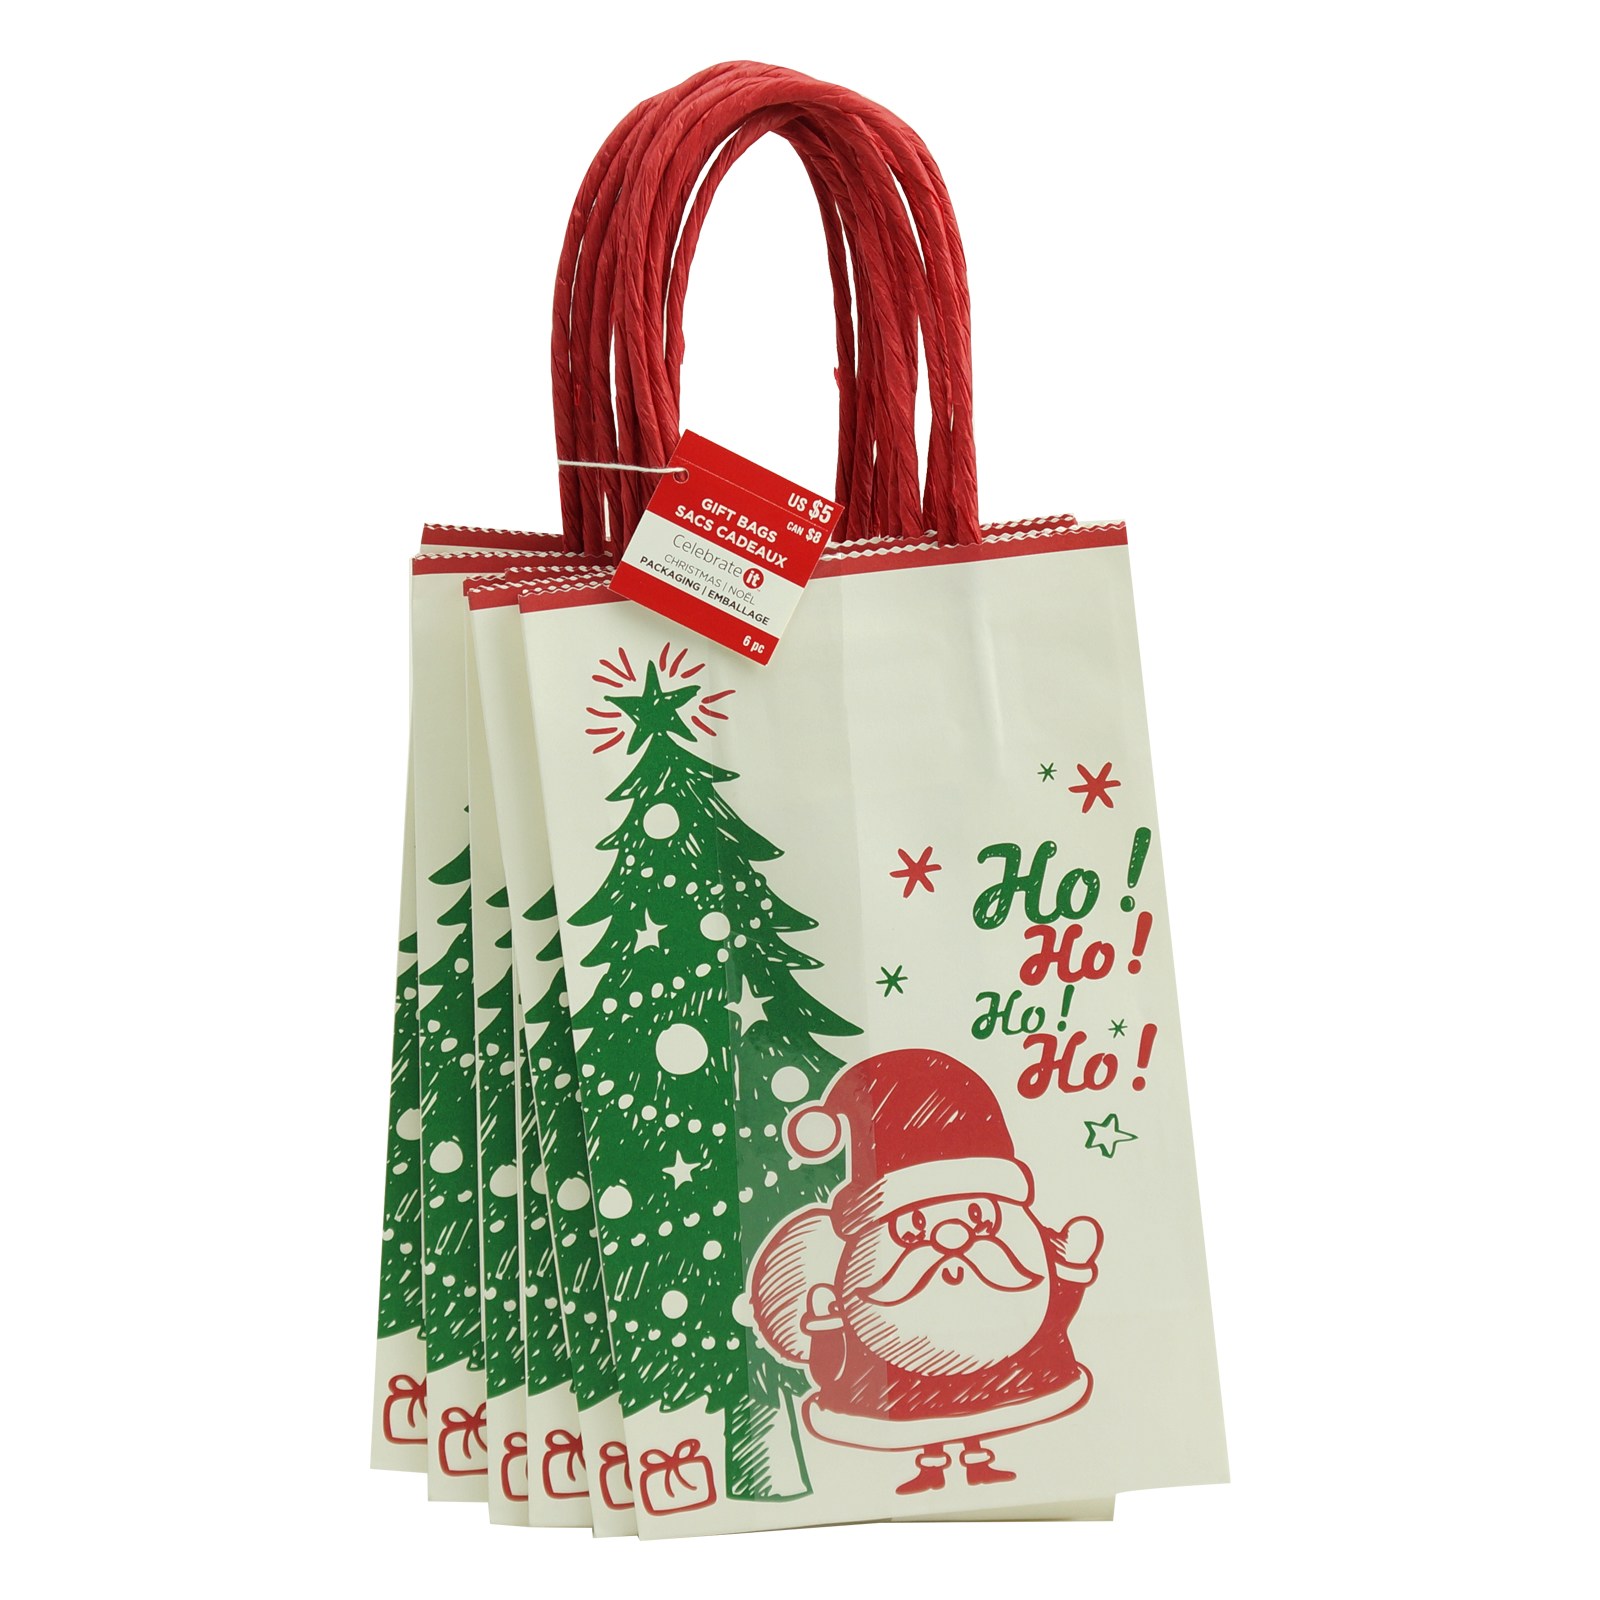 Shop for the Santa Ho Ho Ho Small Bags by Celebrate It™ at Michaels